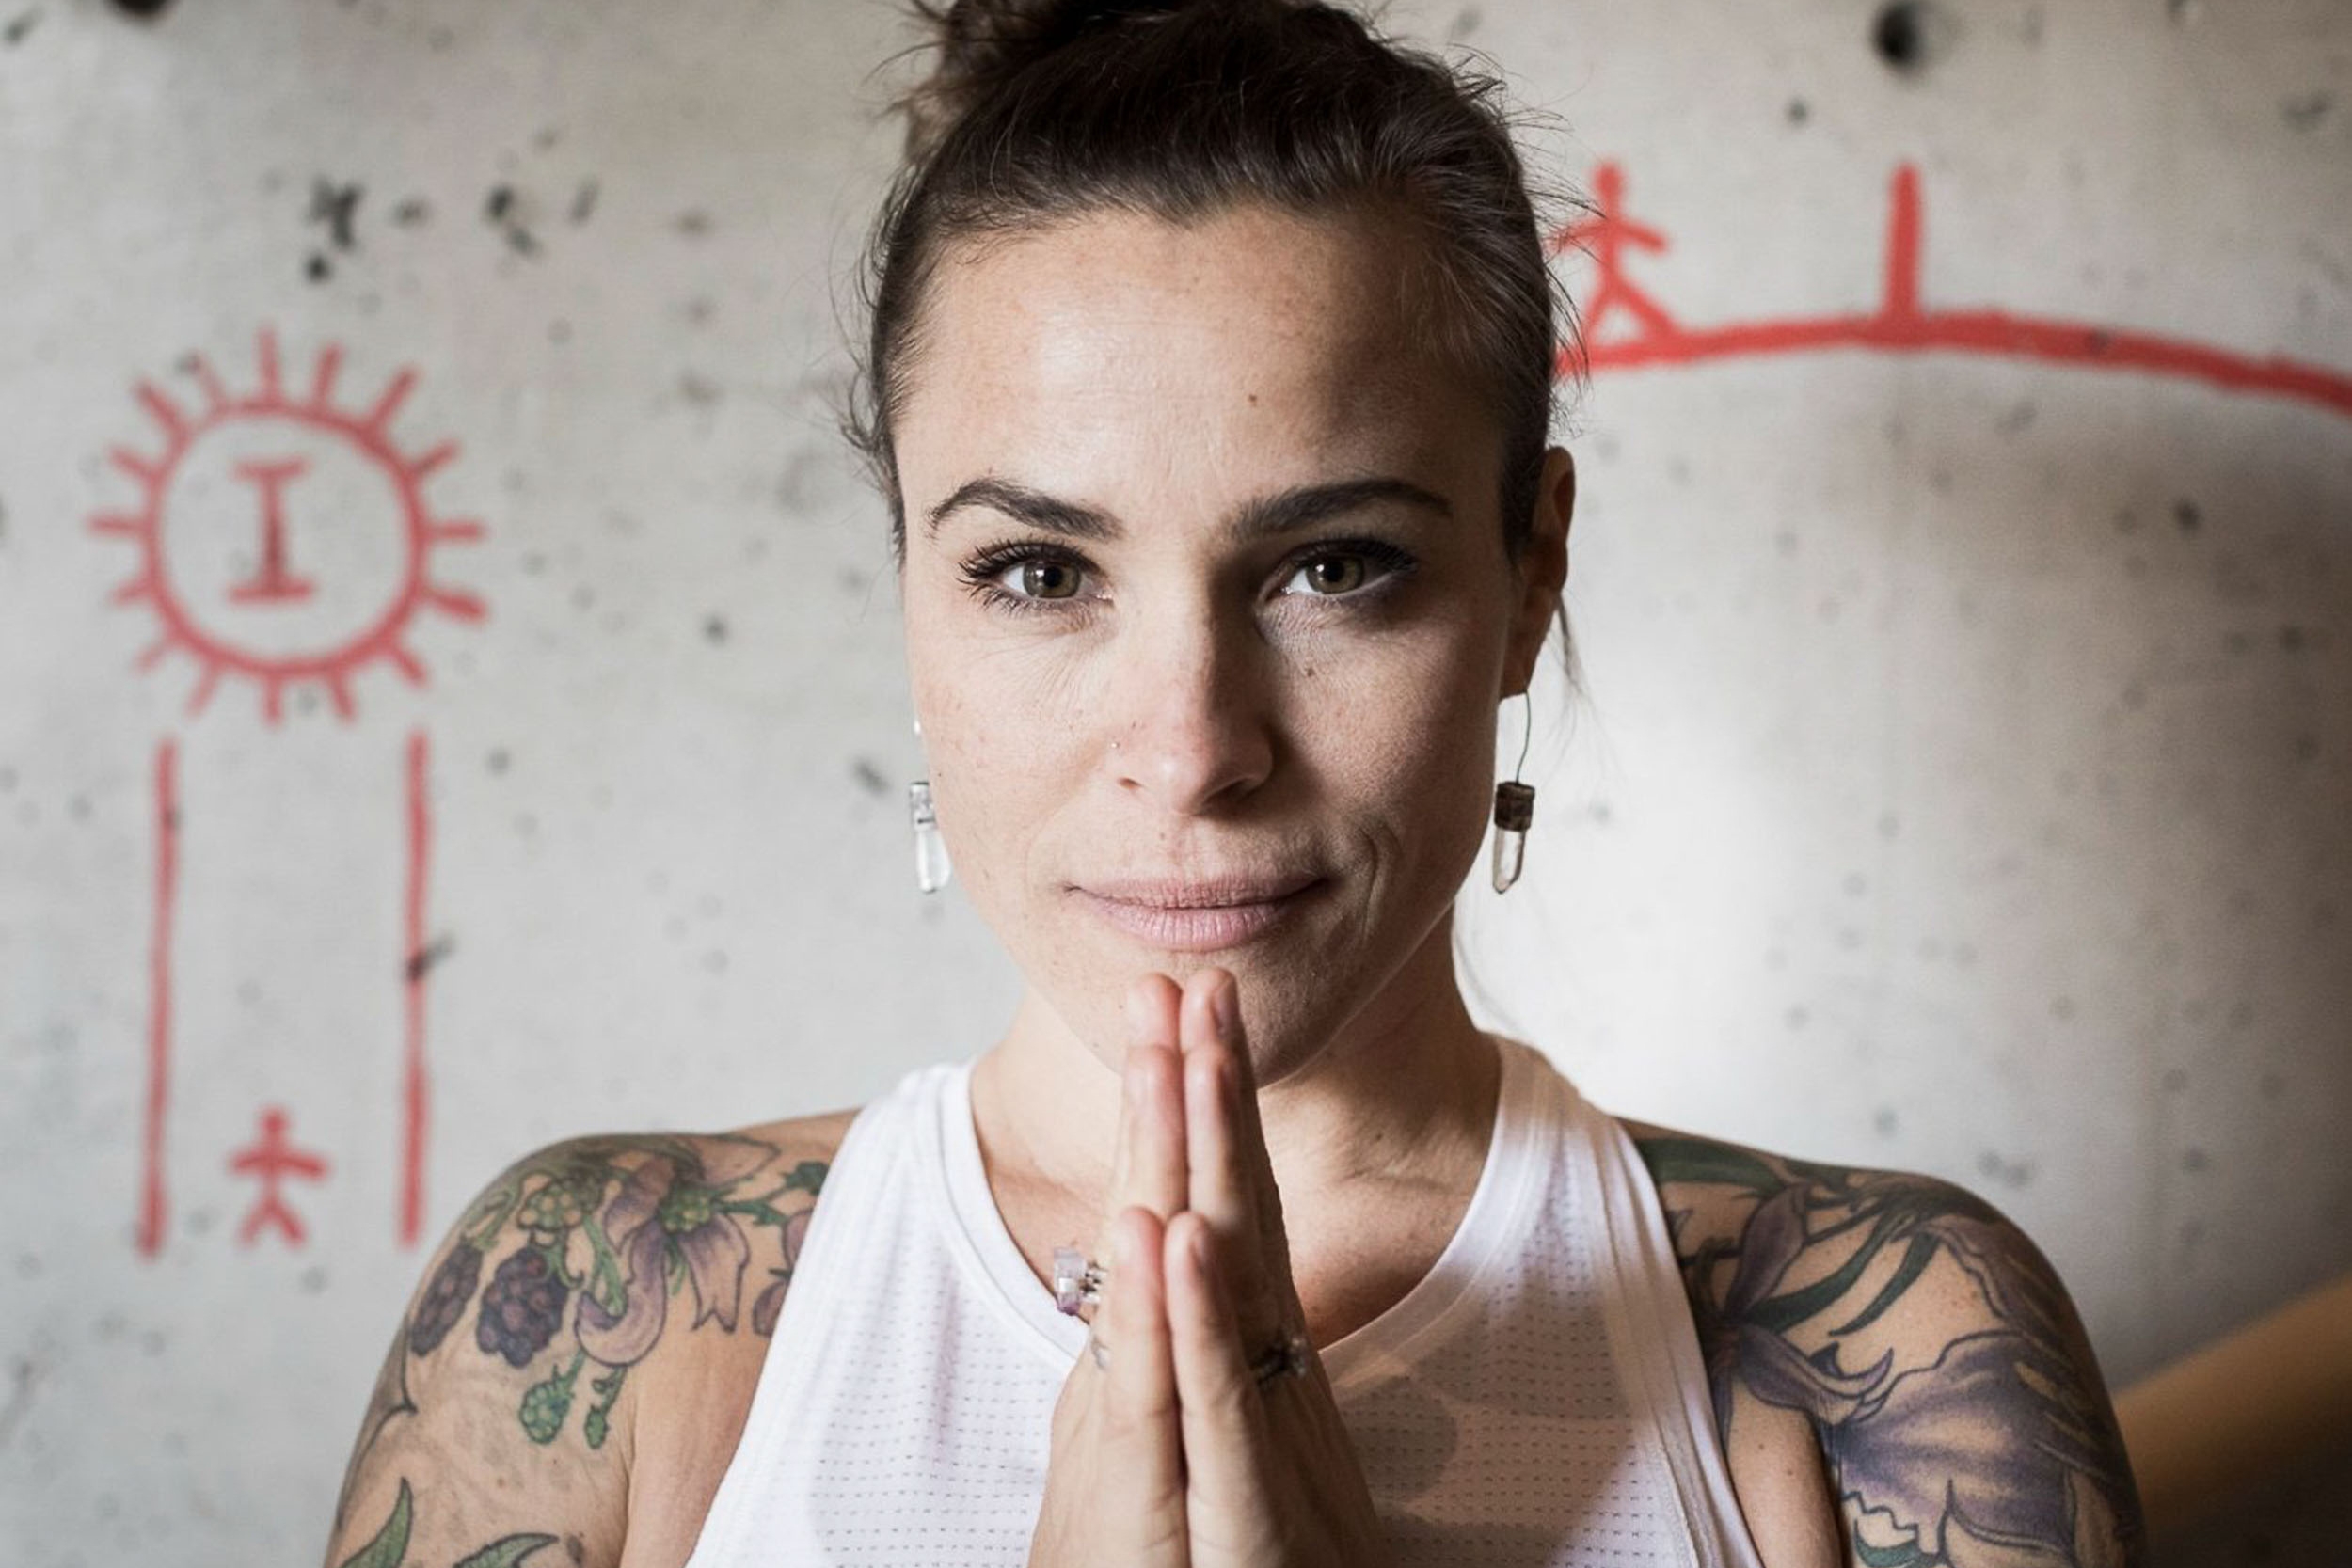 A focused yoga instructor at Shala Yoga studio in Squamish assumes the Anjali Mudra pose, her tattoos creating a unique contrast with the spiritual symbol on the wall behind her, embodying the studio's embrace of individuality and inner peace.